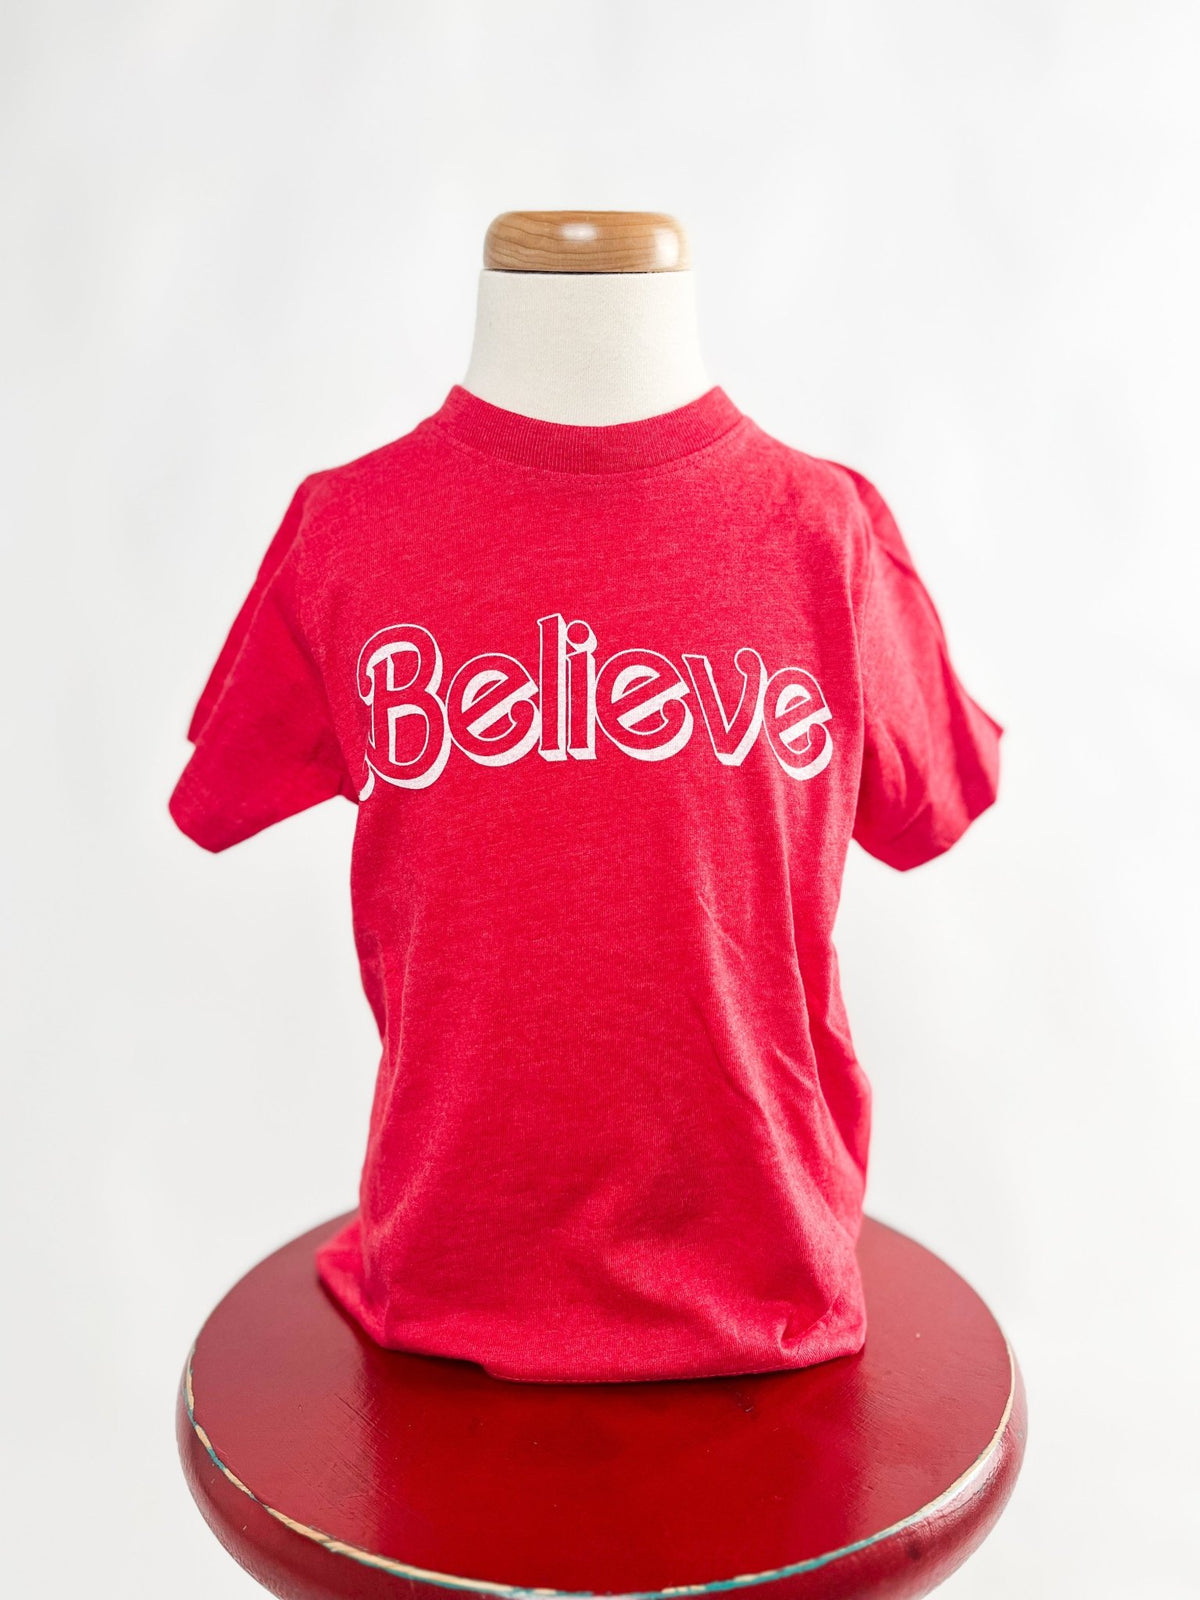 Kids Believe Barbie t-shirt red - Trendy Holiday Apparel at Lush Fashion Lounge Boutique in Oklahoma City